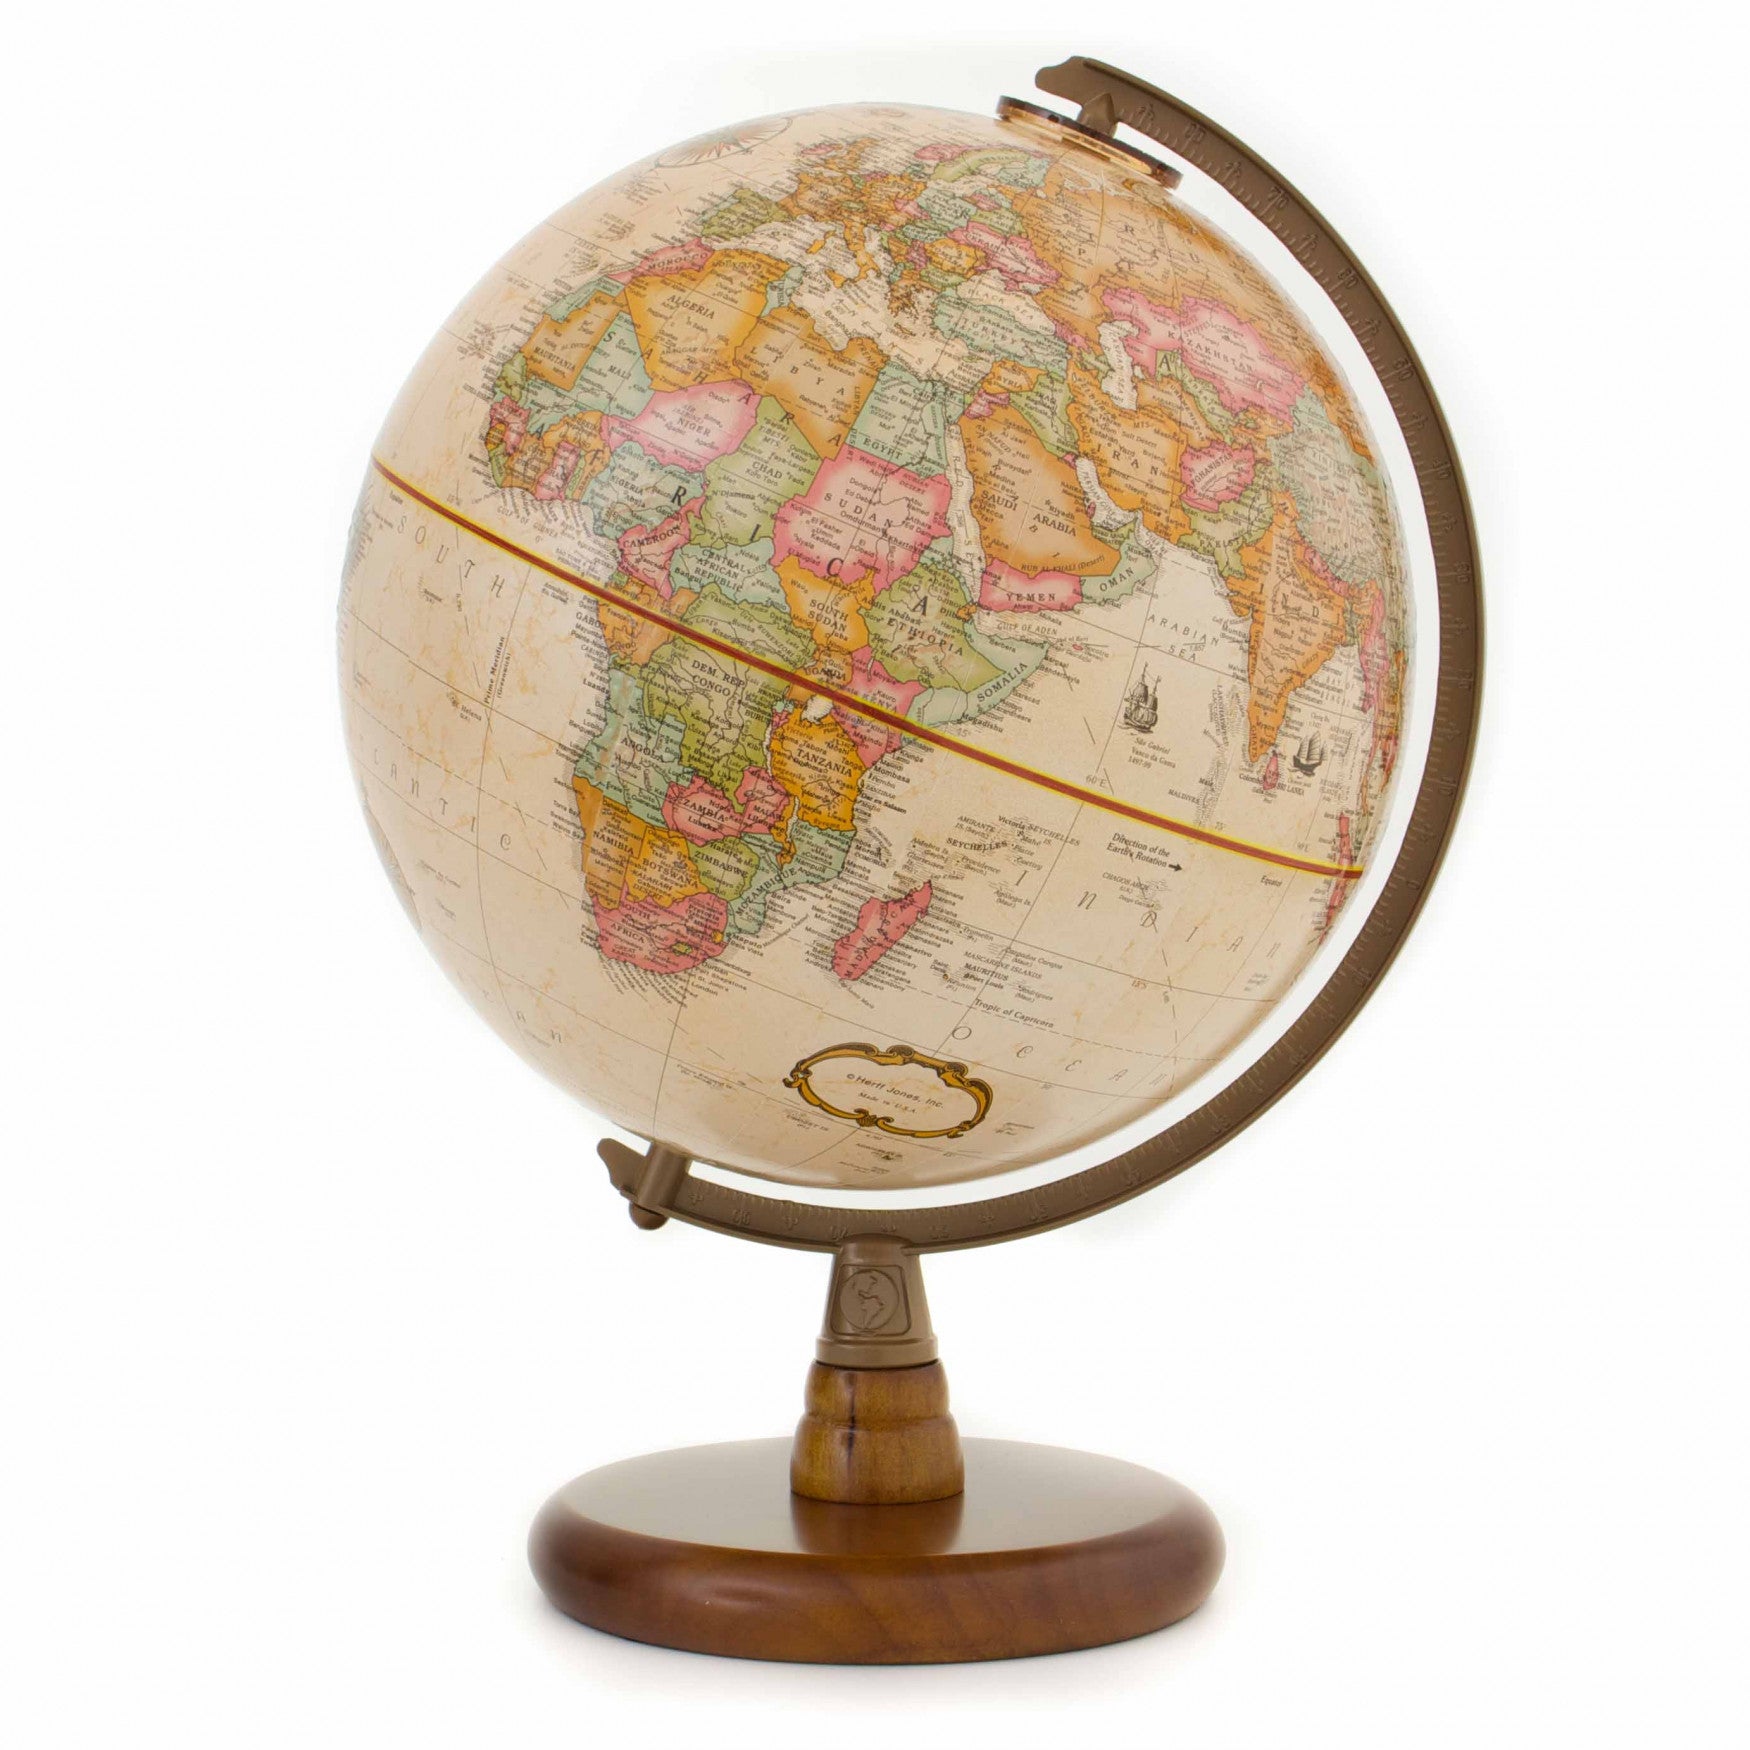 The Quincy Antique 23cm Globe by Replogle